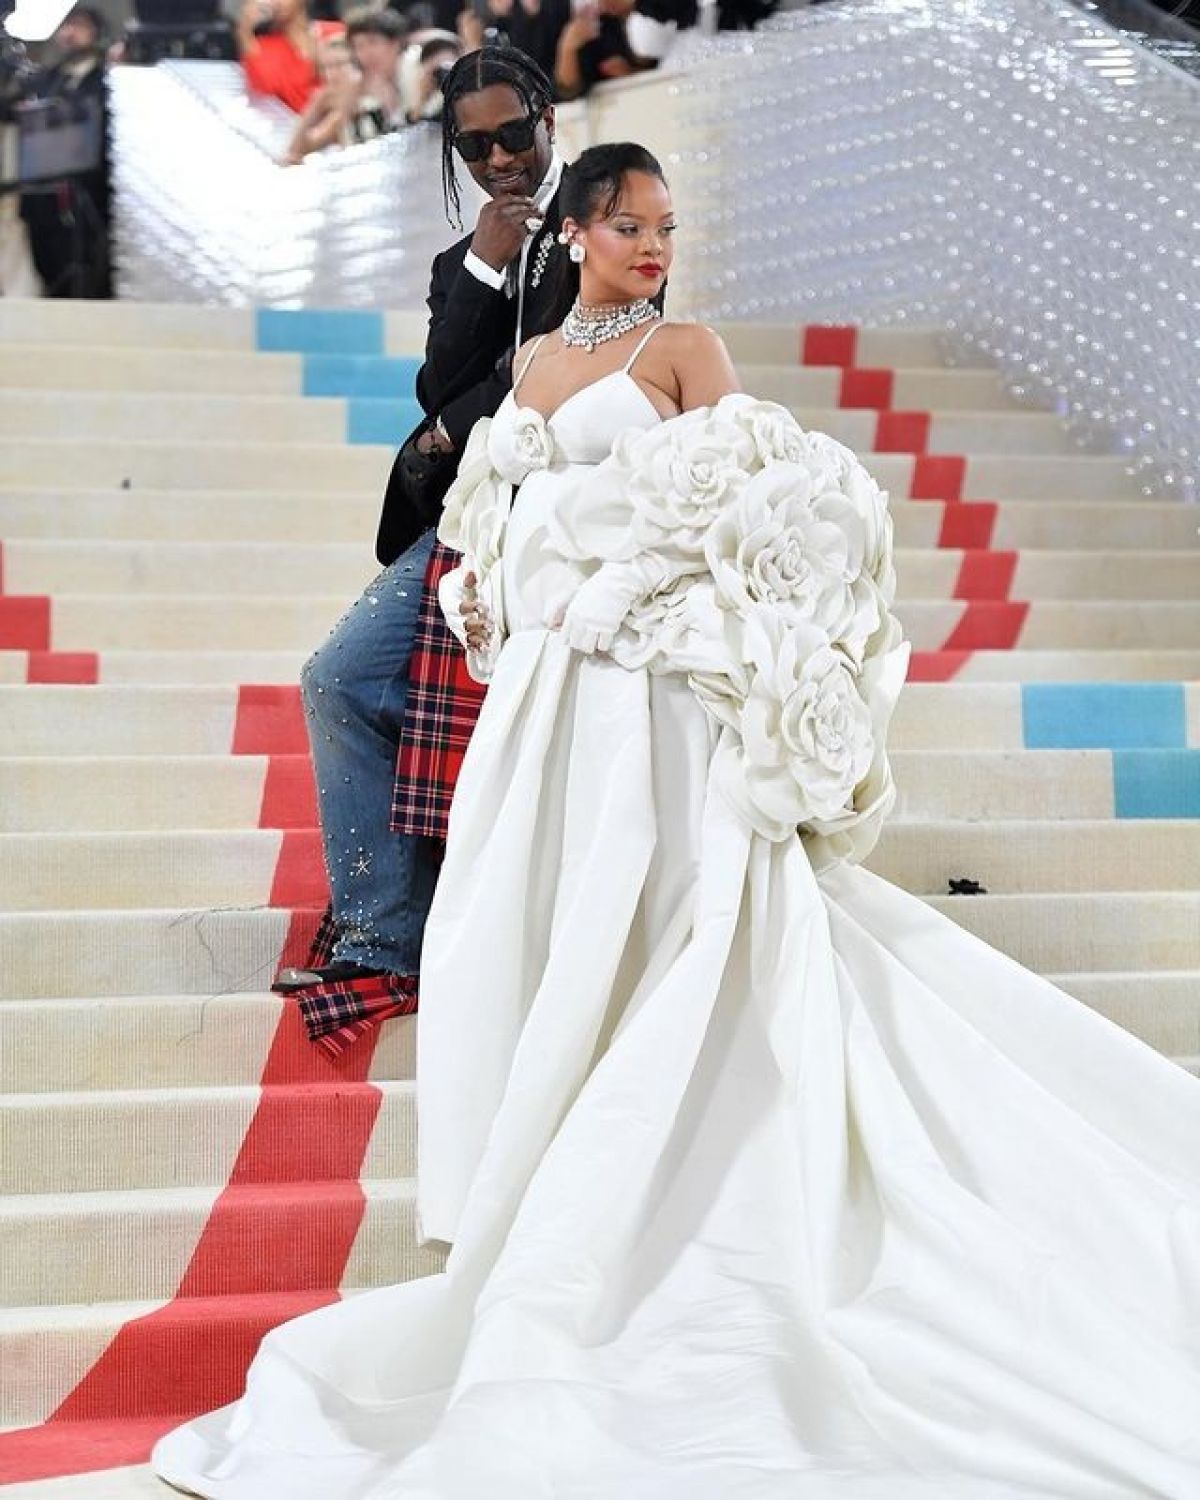 Rihanna Wore the Most Outrageous Dress Ever at the MET Gala Night Event